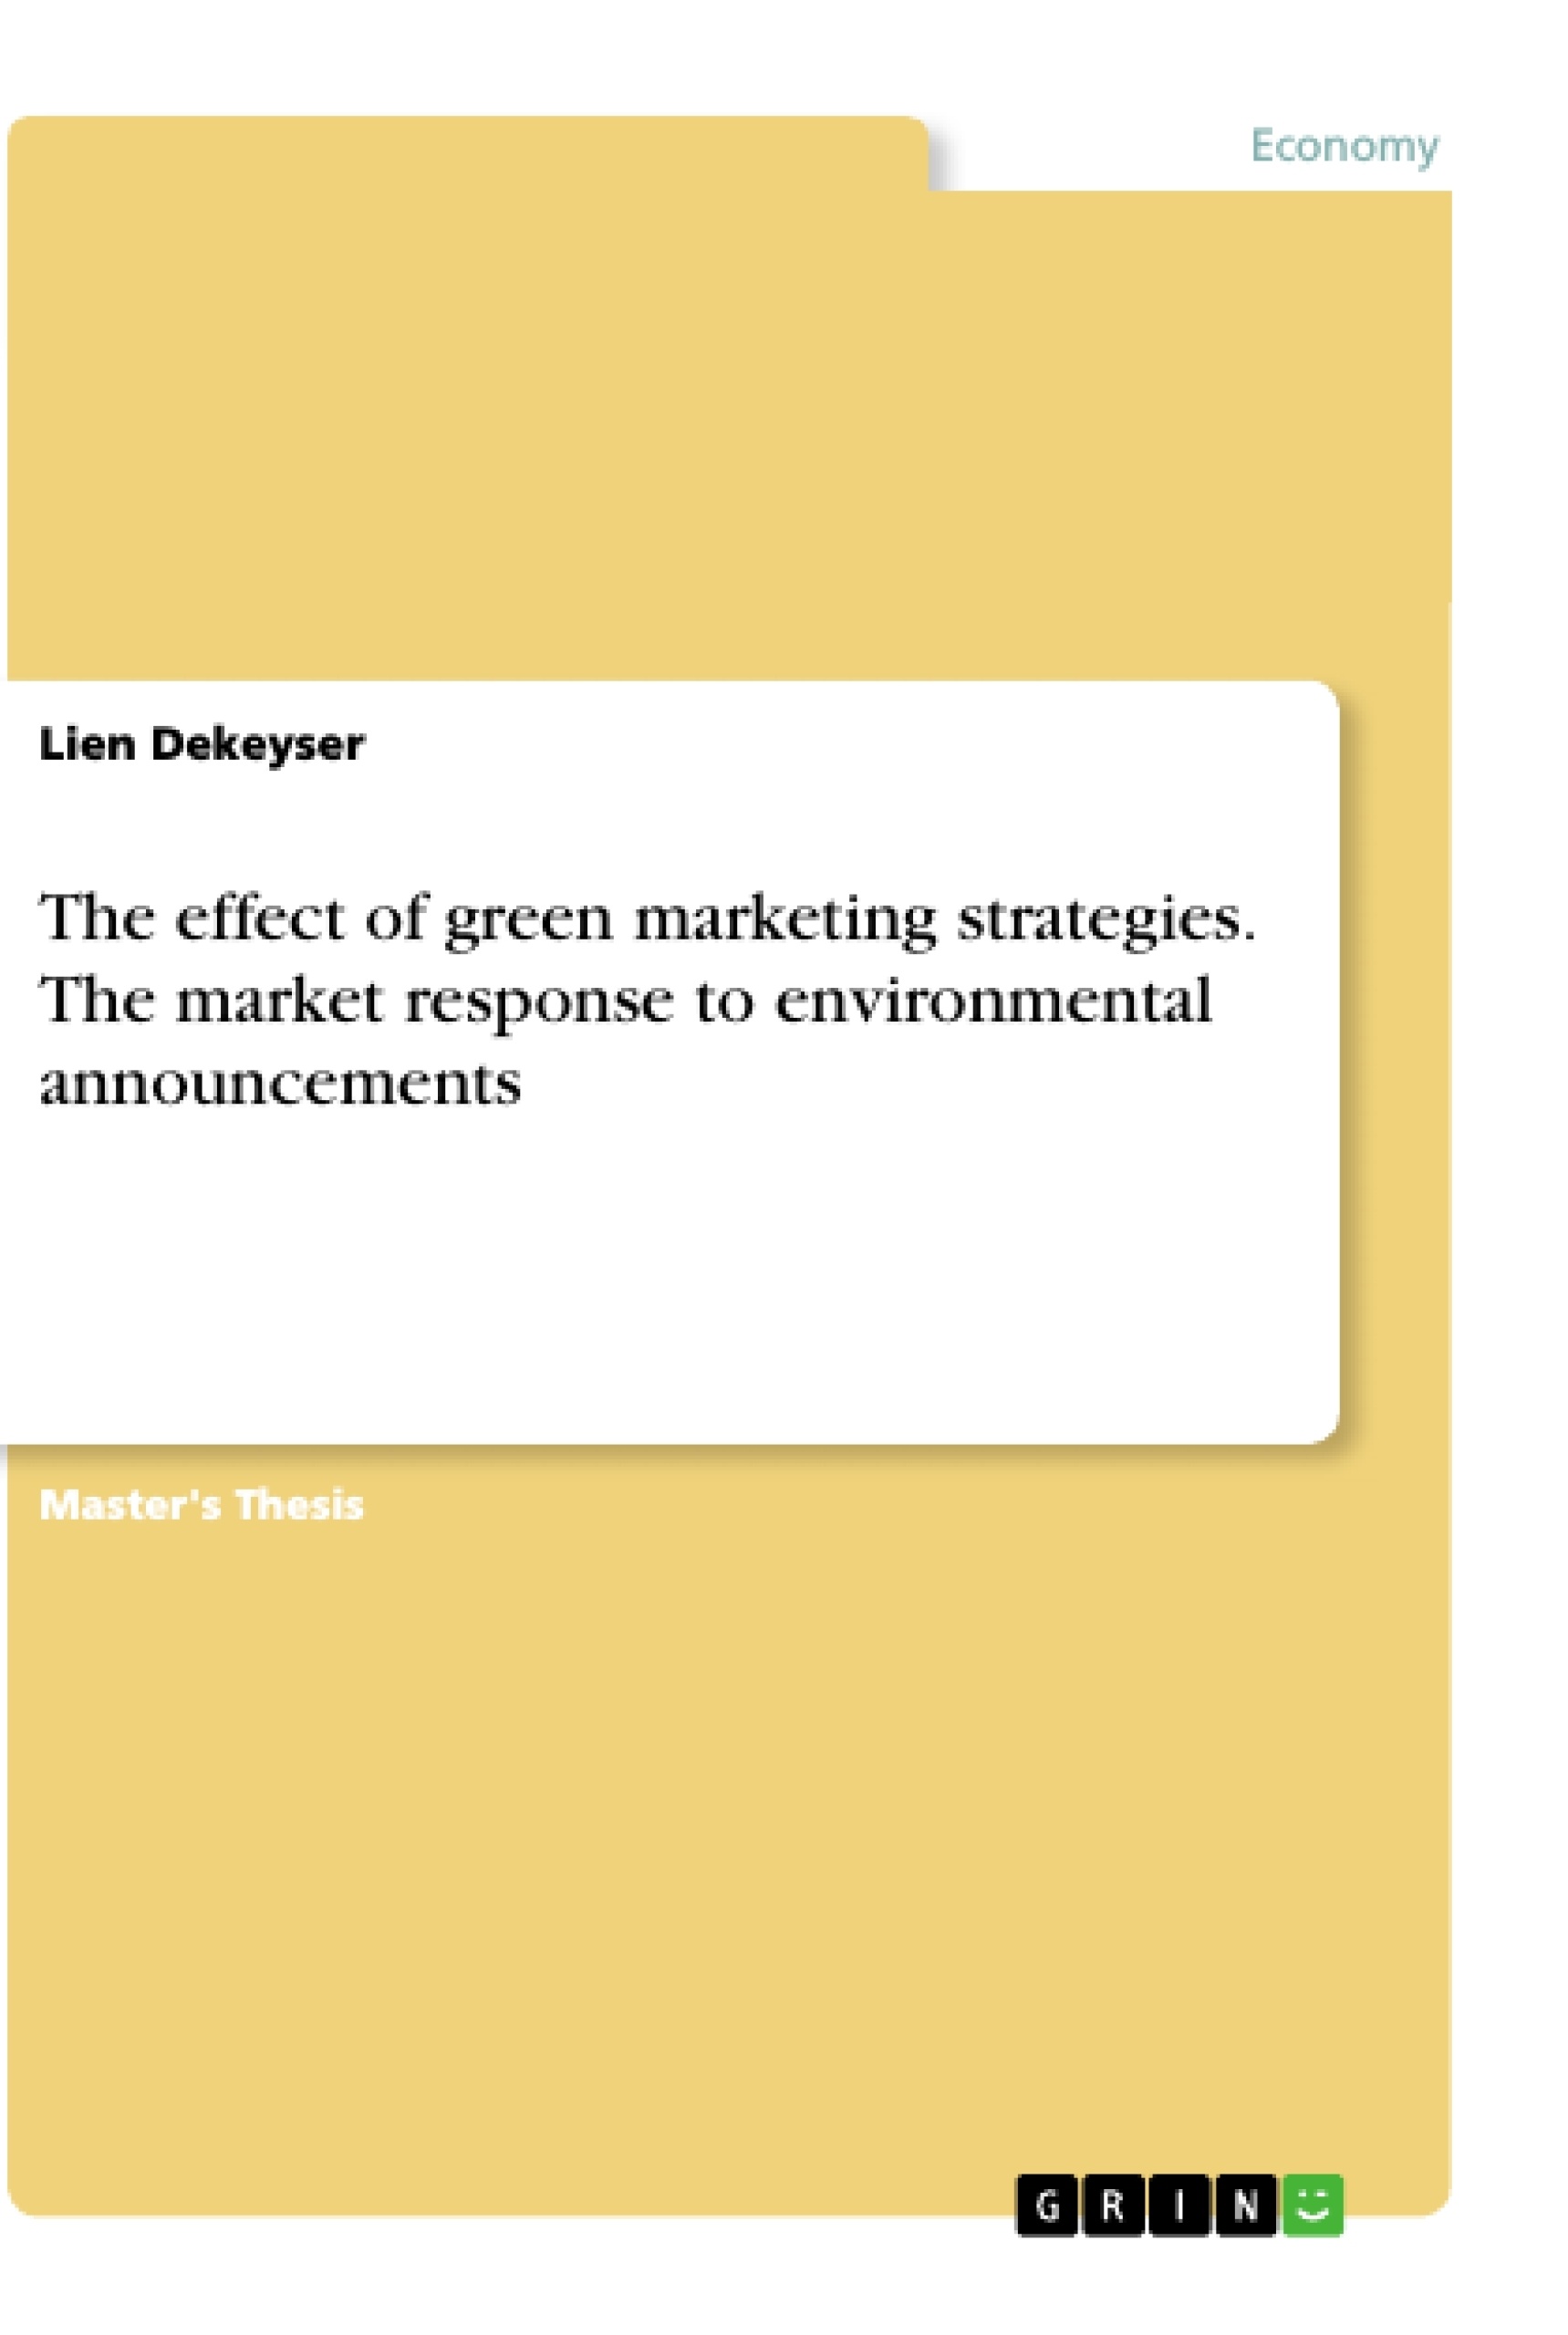 Titre: The effect of green marketing strategies. The market response to environmental announcements